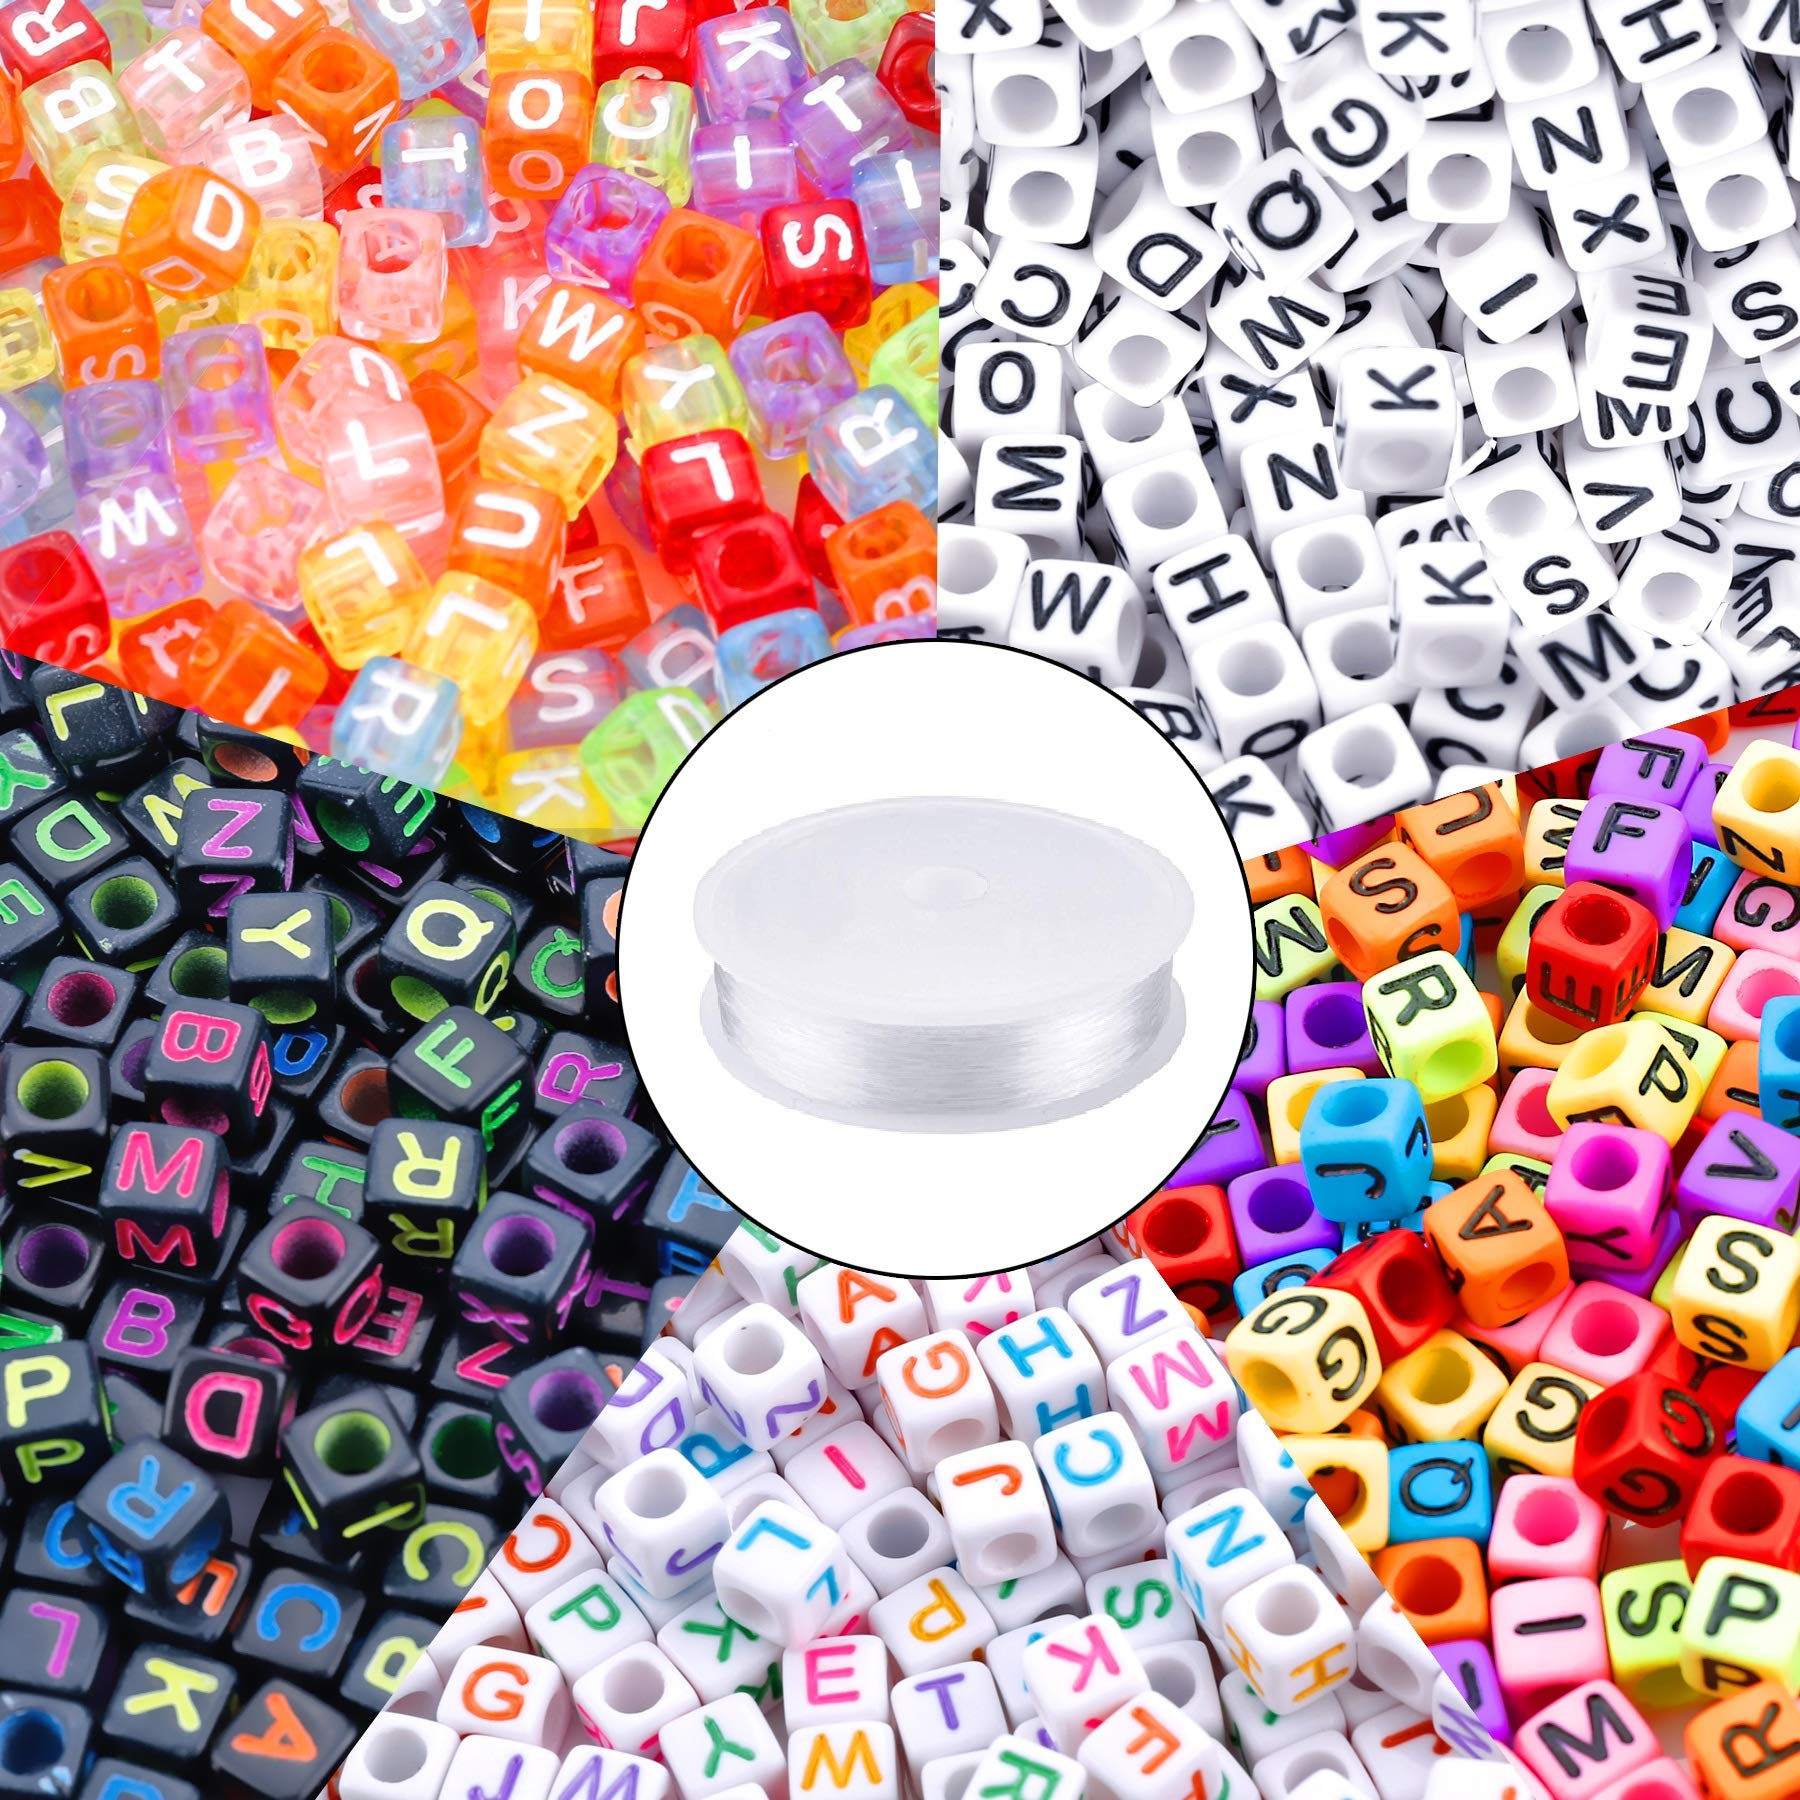 Simetufy 1350pcs Letter Beads for Bracelet Jewelry Making, 7 Style Colorful  Round Alphabet Beads Number Beads Heart-Shaped Beads with 1 Roll Elastic  String Cord, Beads Kit (7x4mm) for DIY Arts Crafts :